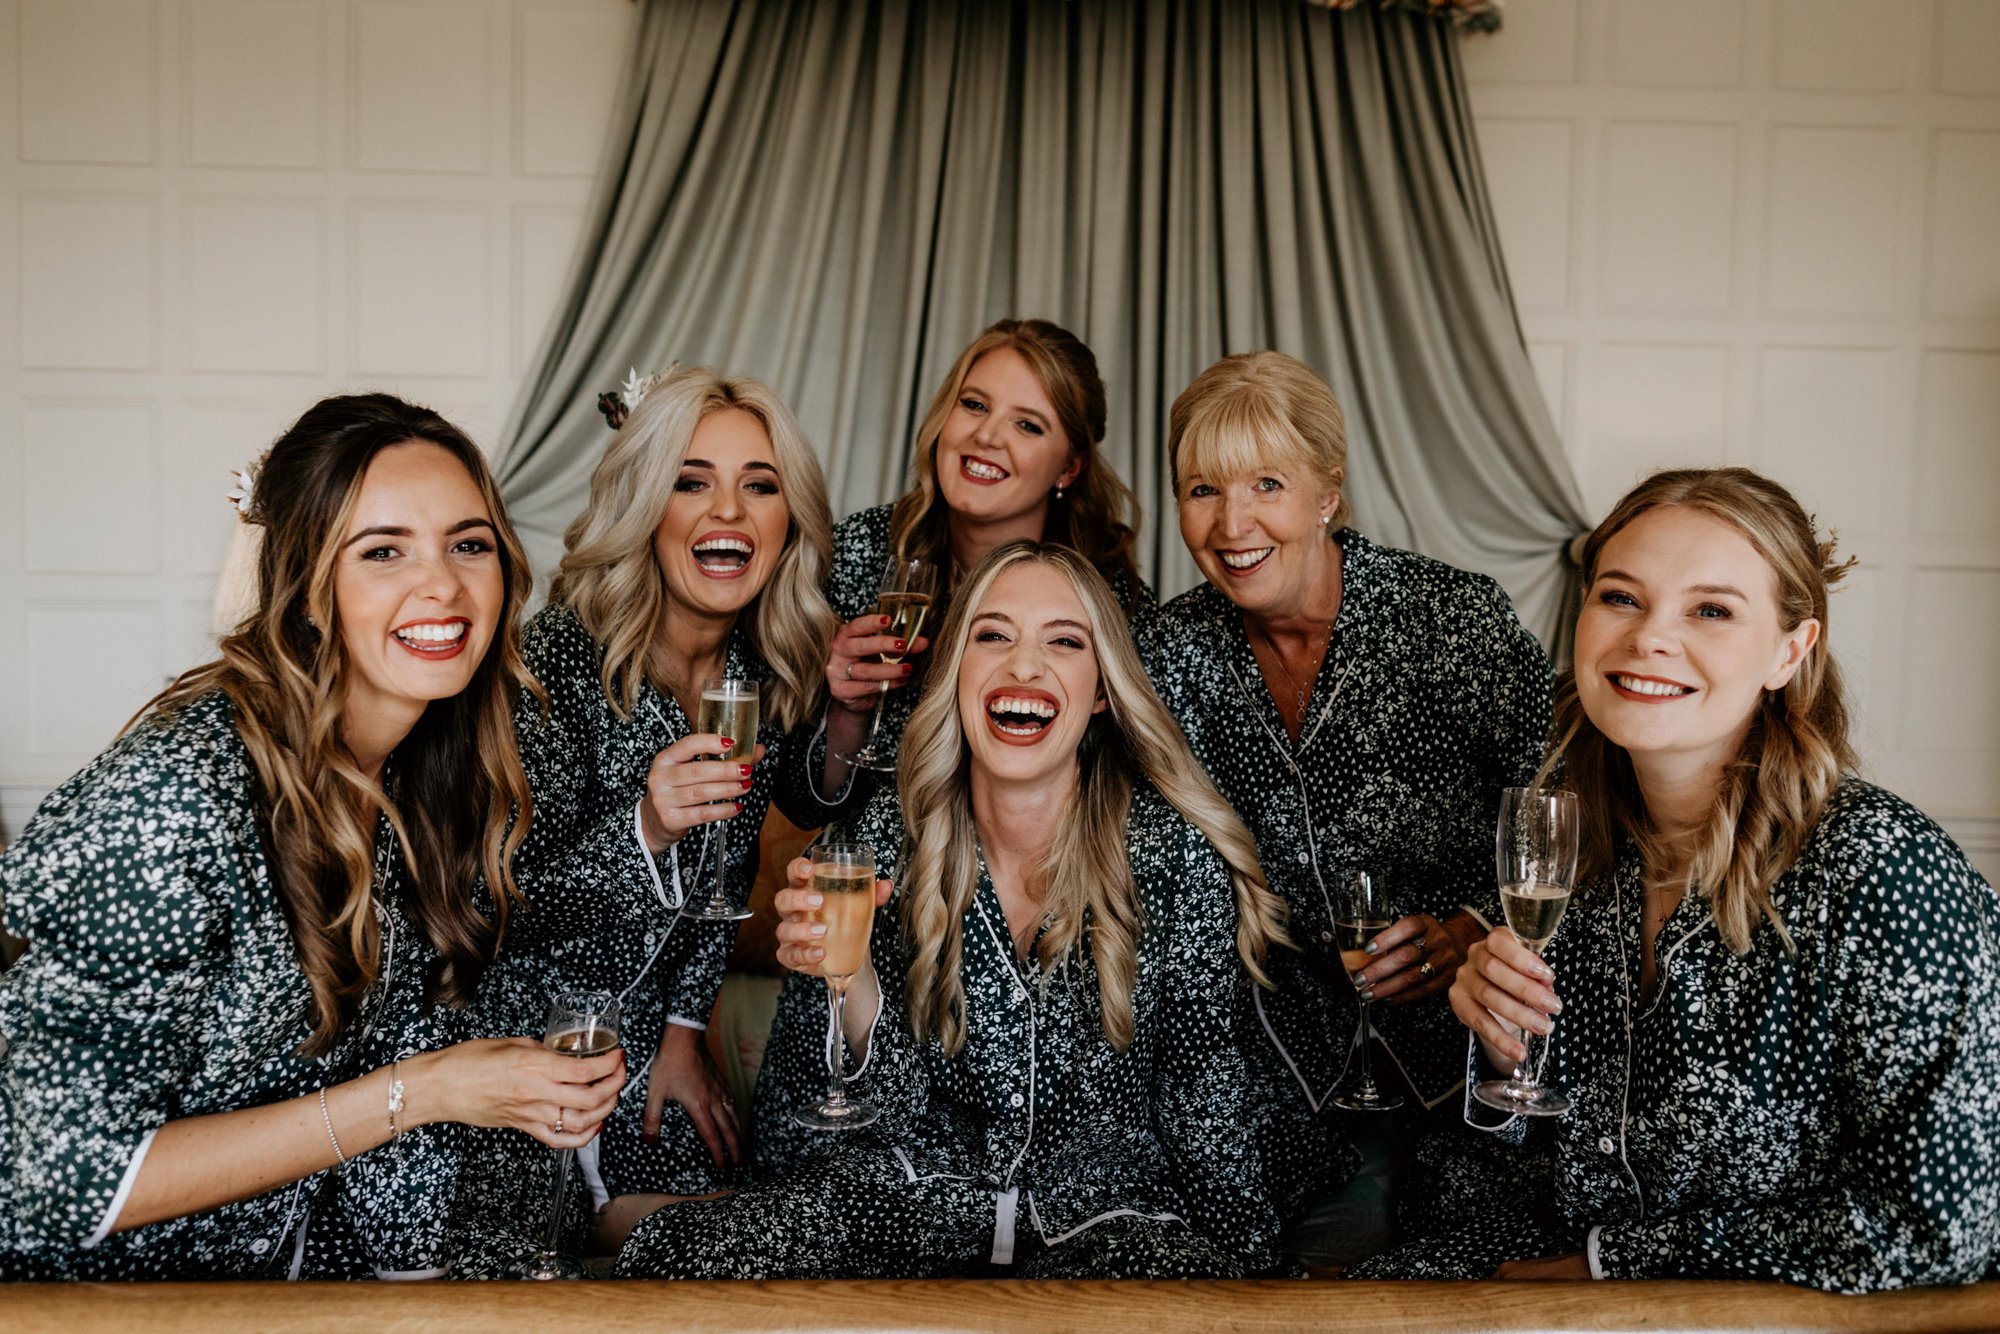 beautiful bridal party dressed in pyjama's enjoying a glass of bubbles on the morning of a wedding